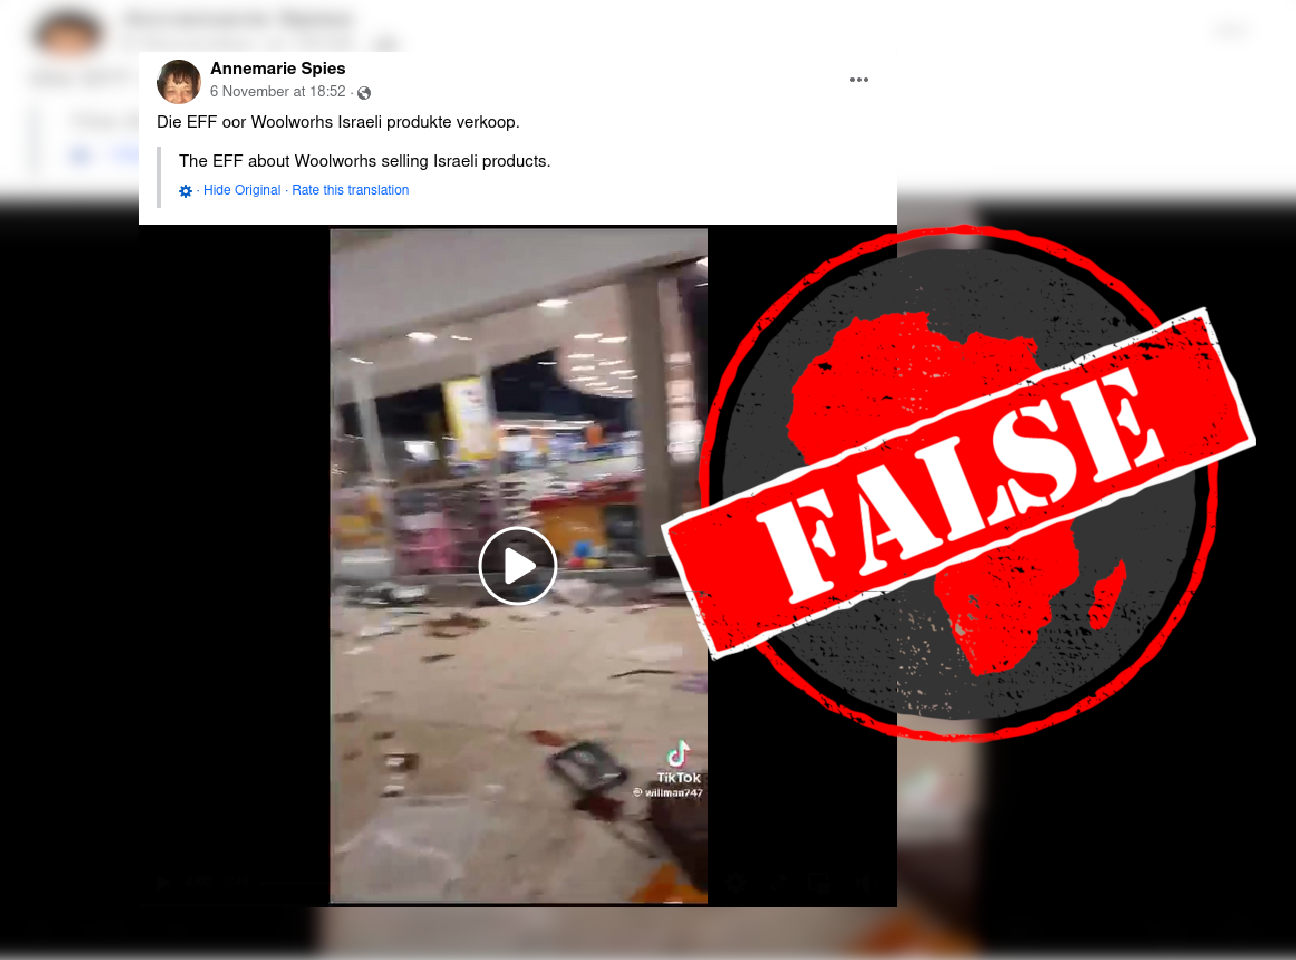 False claim about looting at a mall